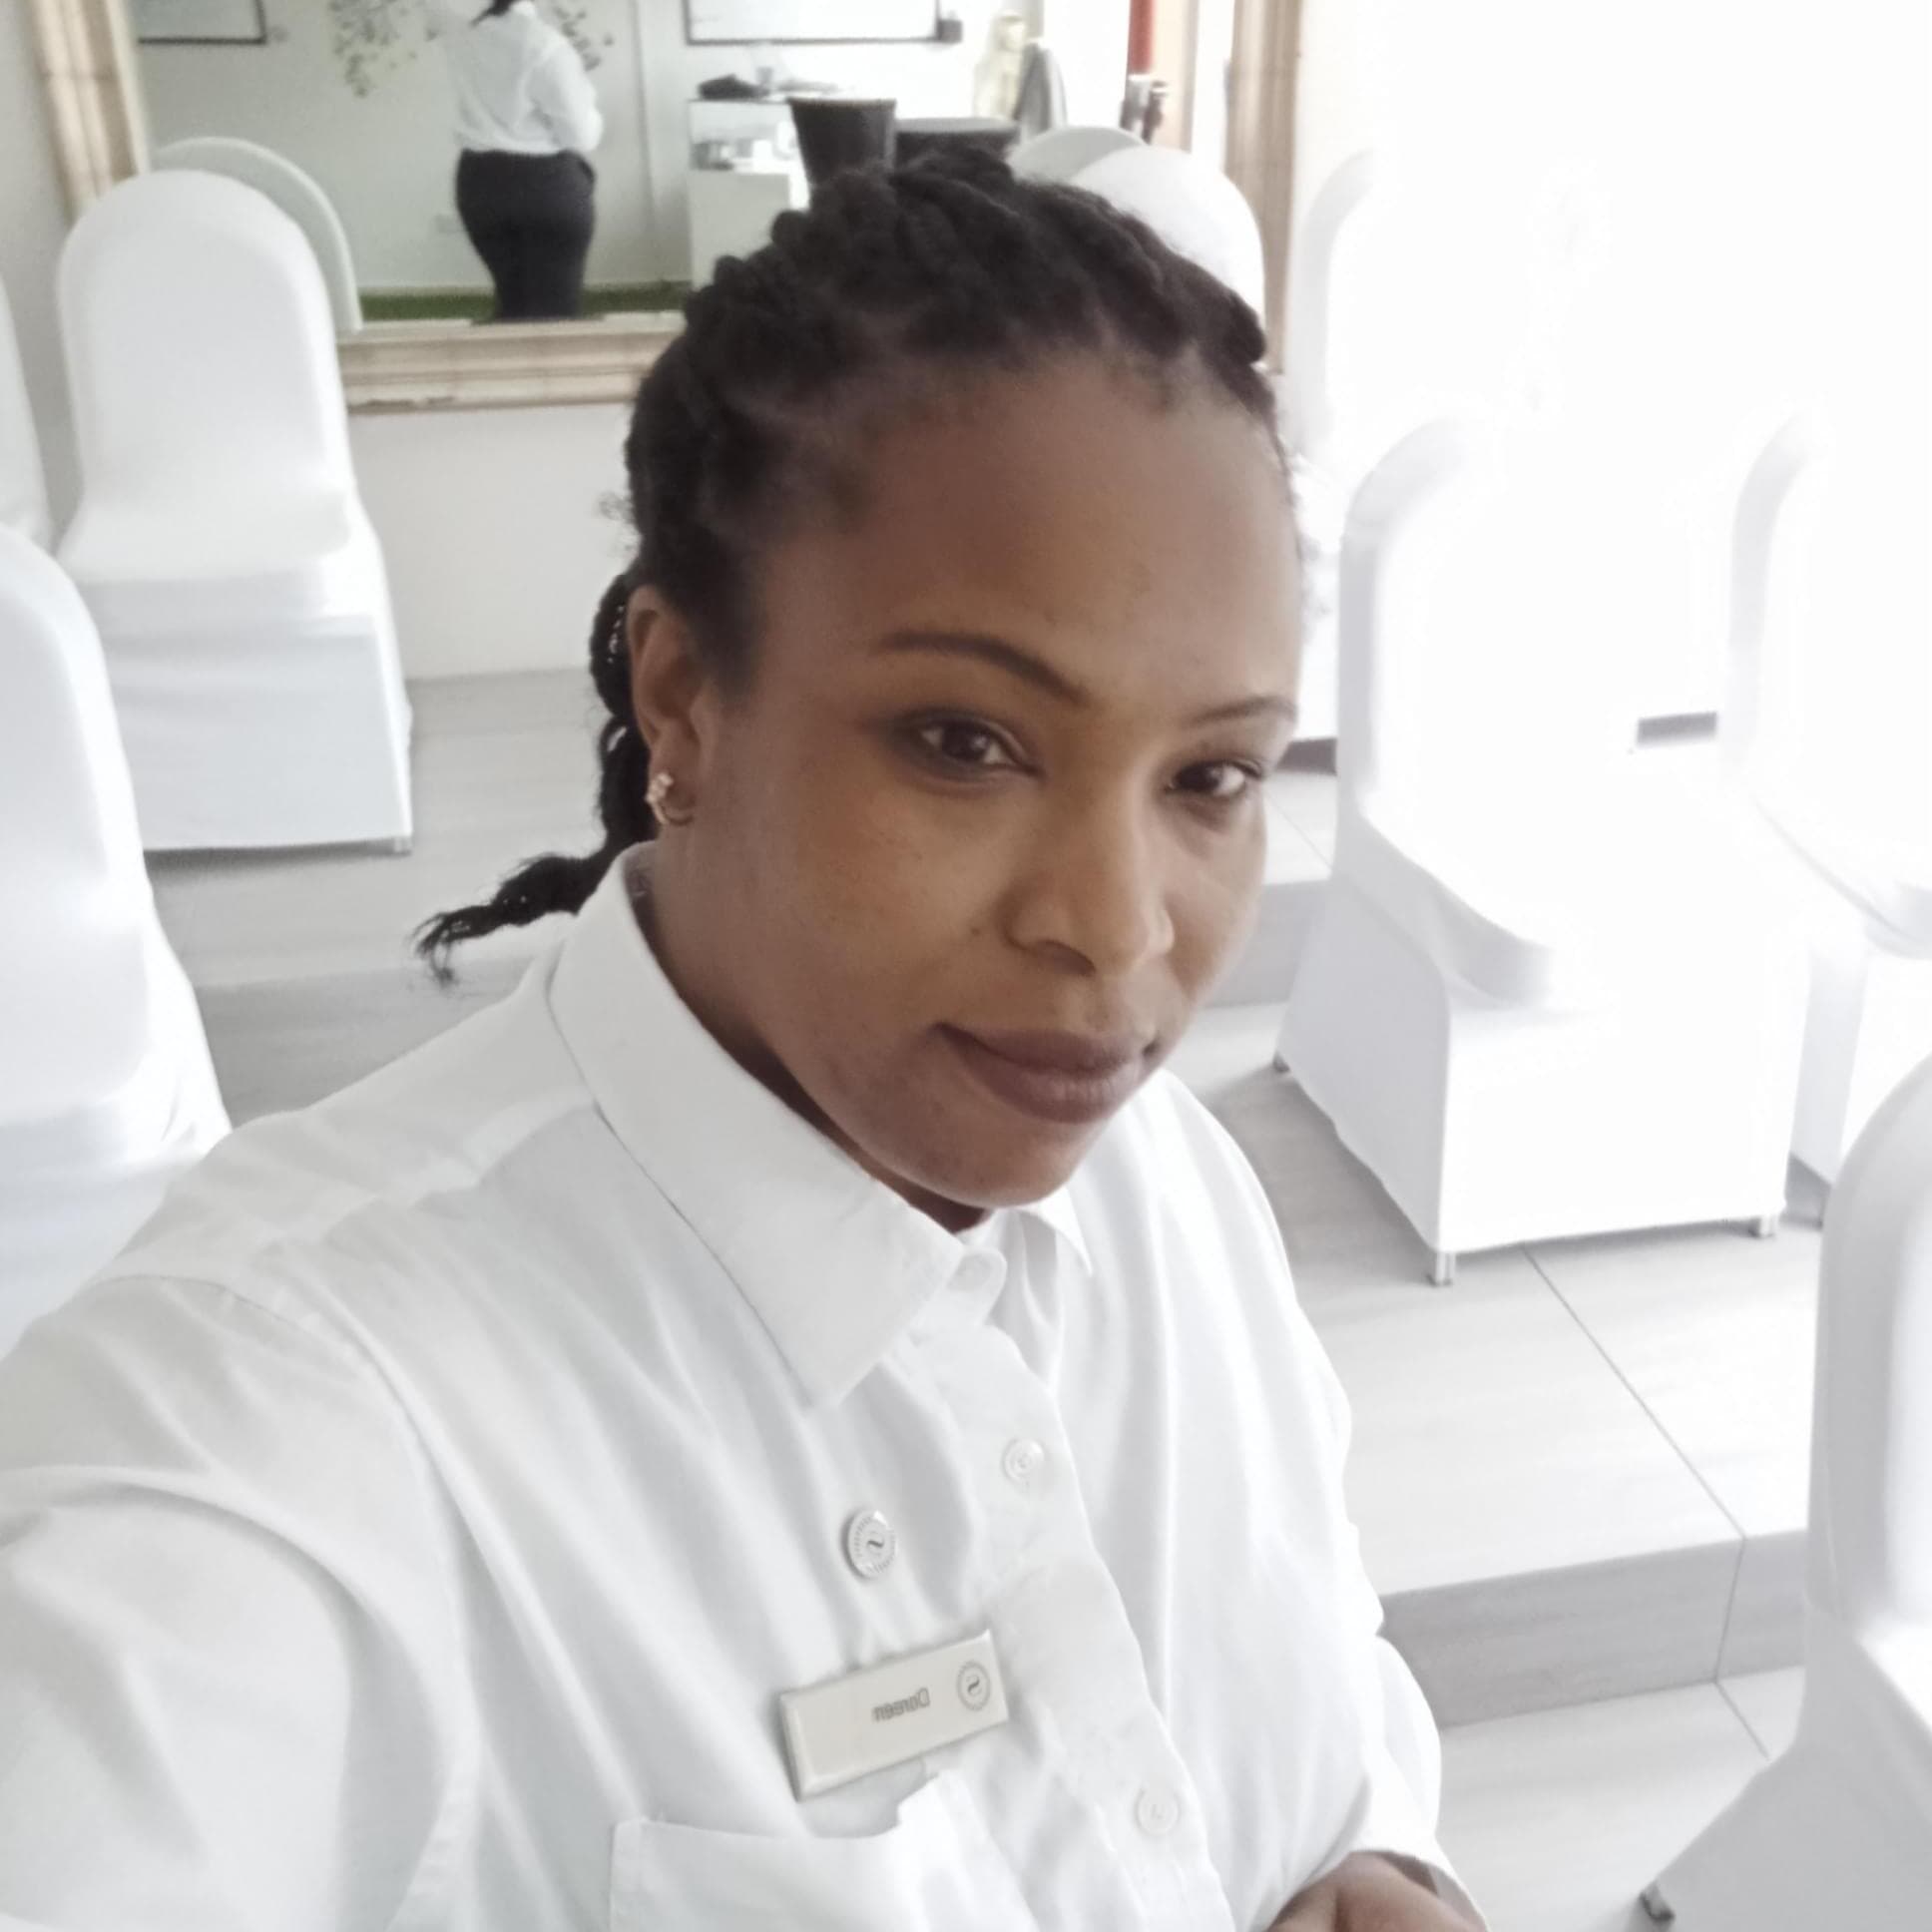 Doreen a Kenyan lady working in dubai,certified nurse assistant willing to do nanny, housekeeping,caregiving,